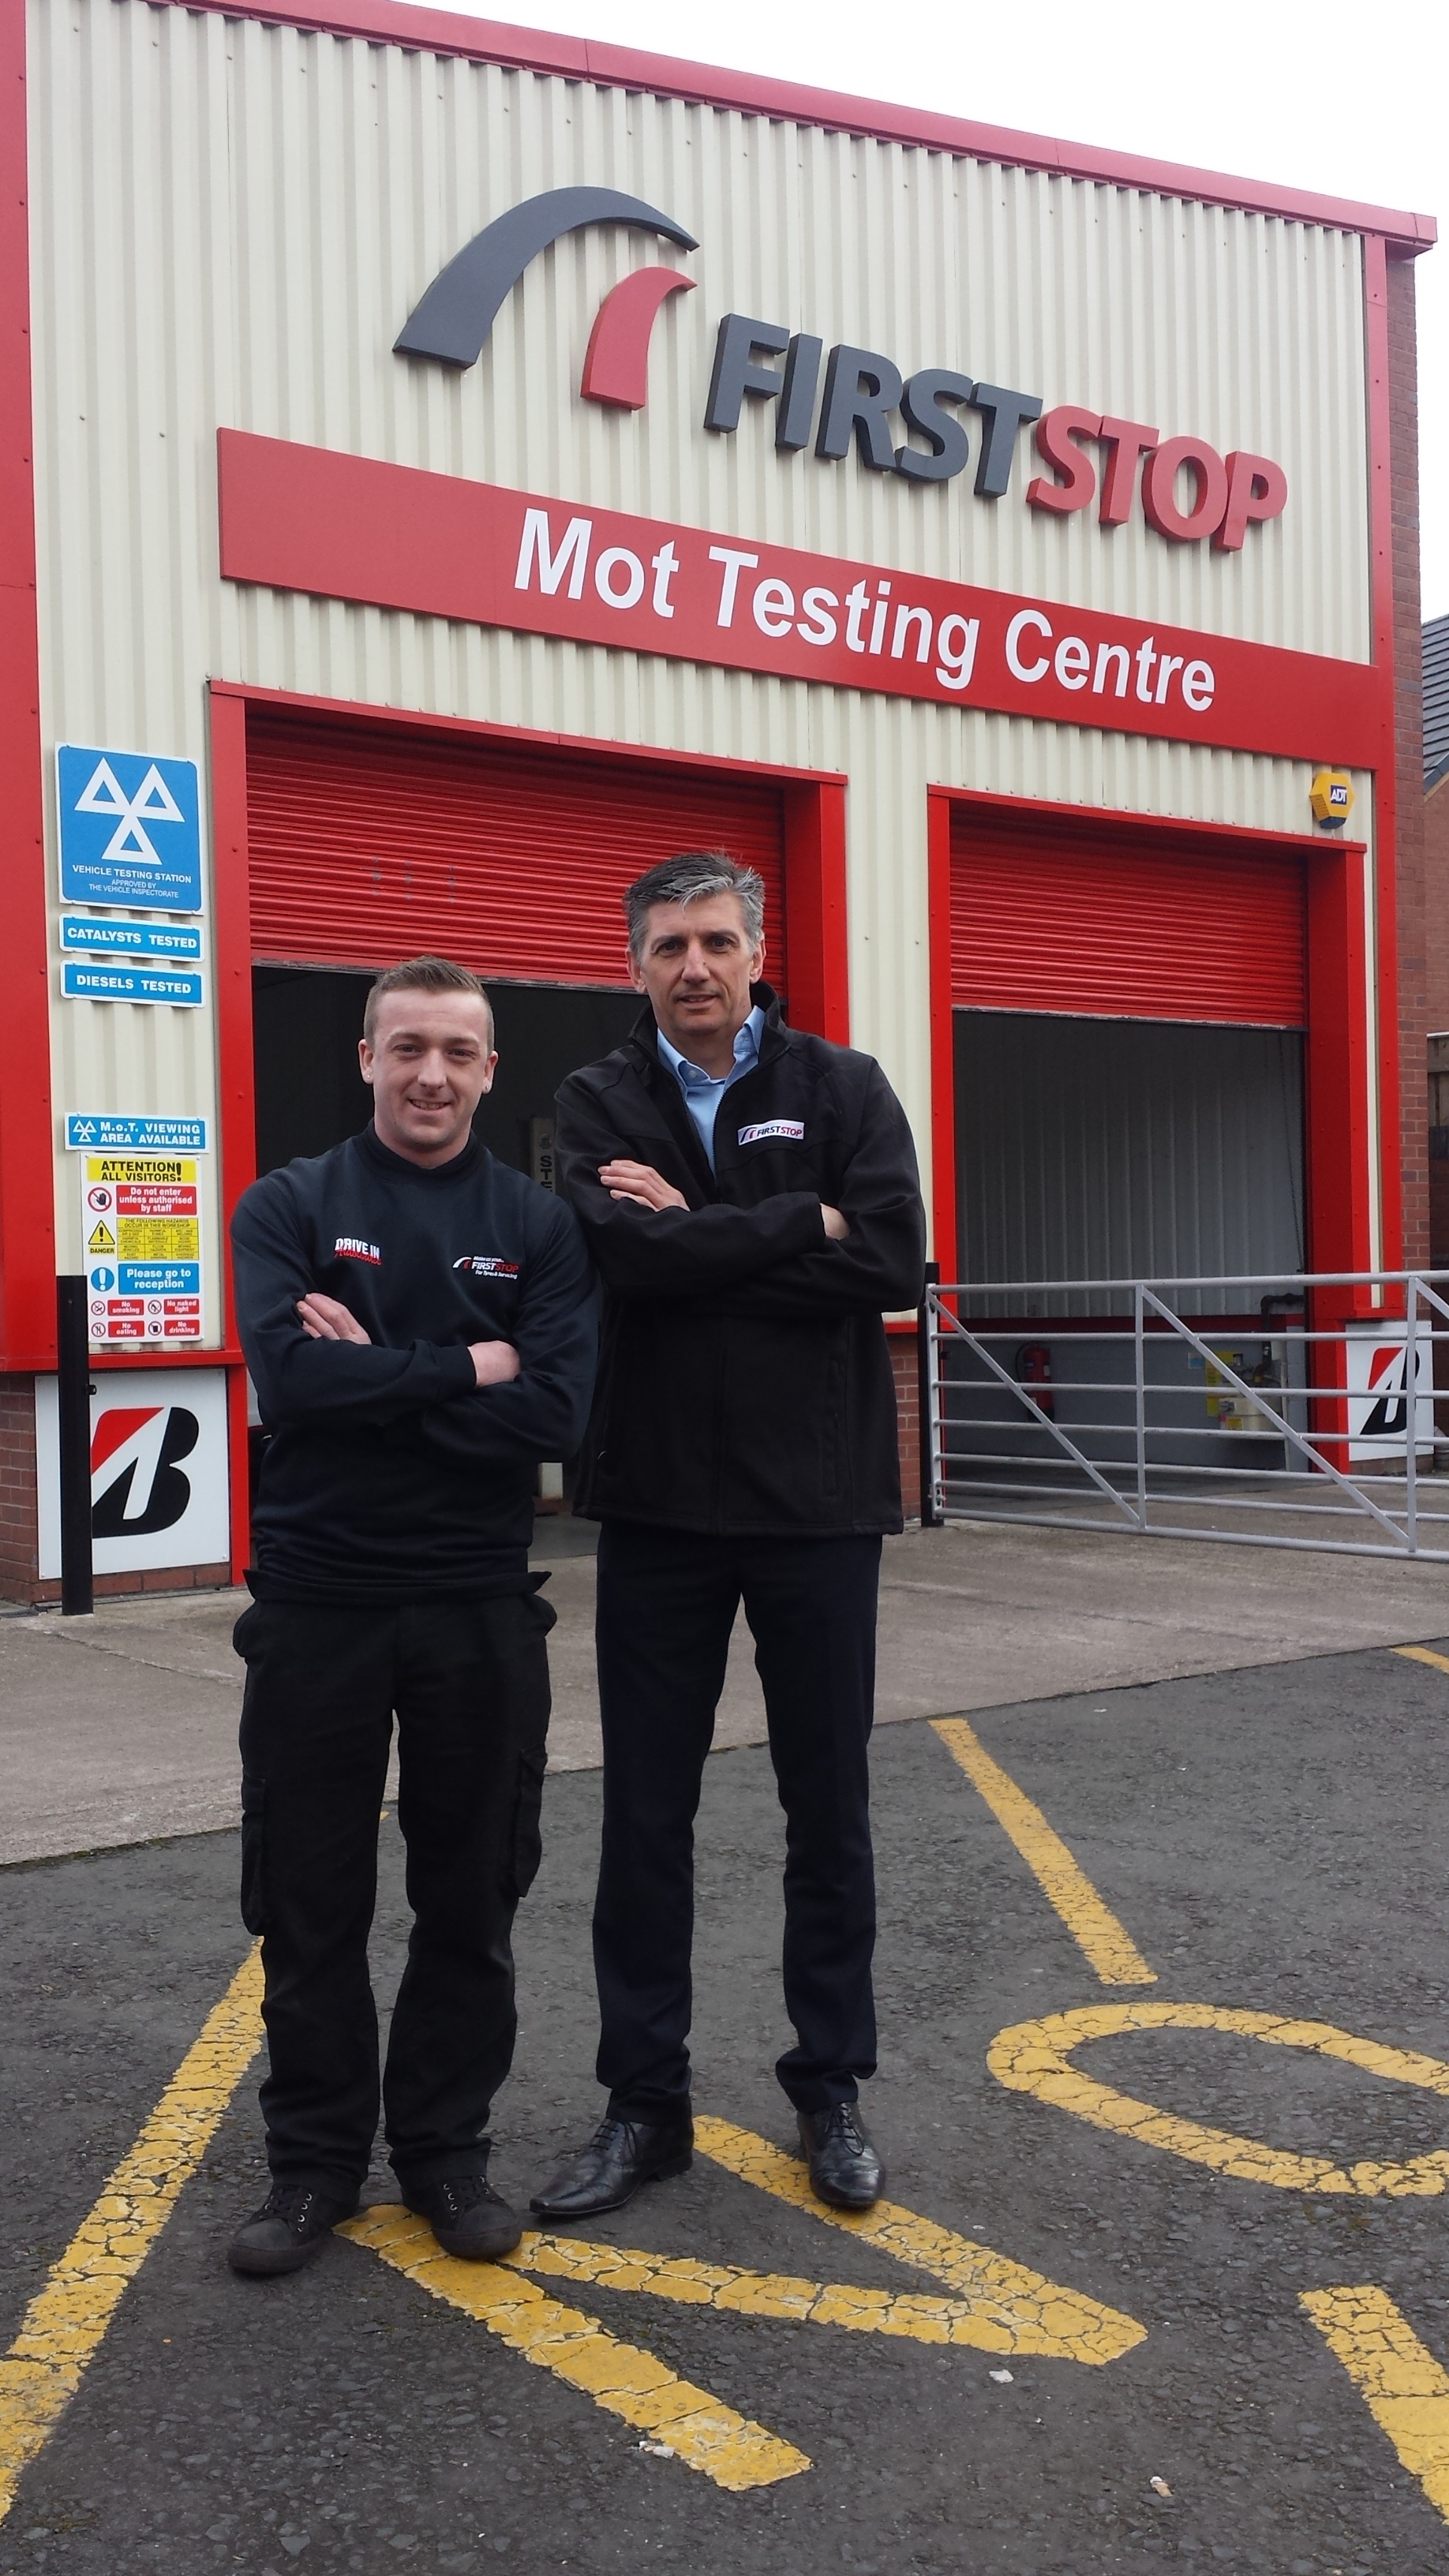 First Stop accepted by Foxy Lady’s female friendly Tyre Services Register